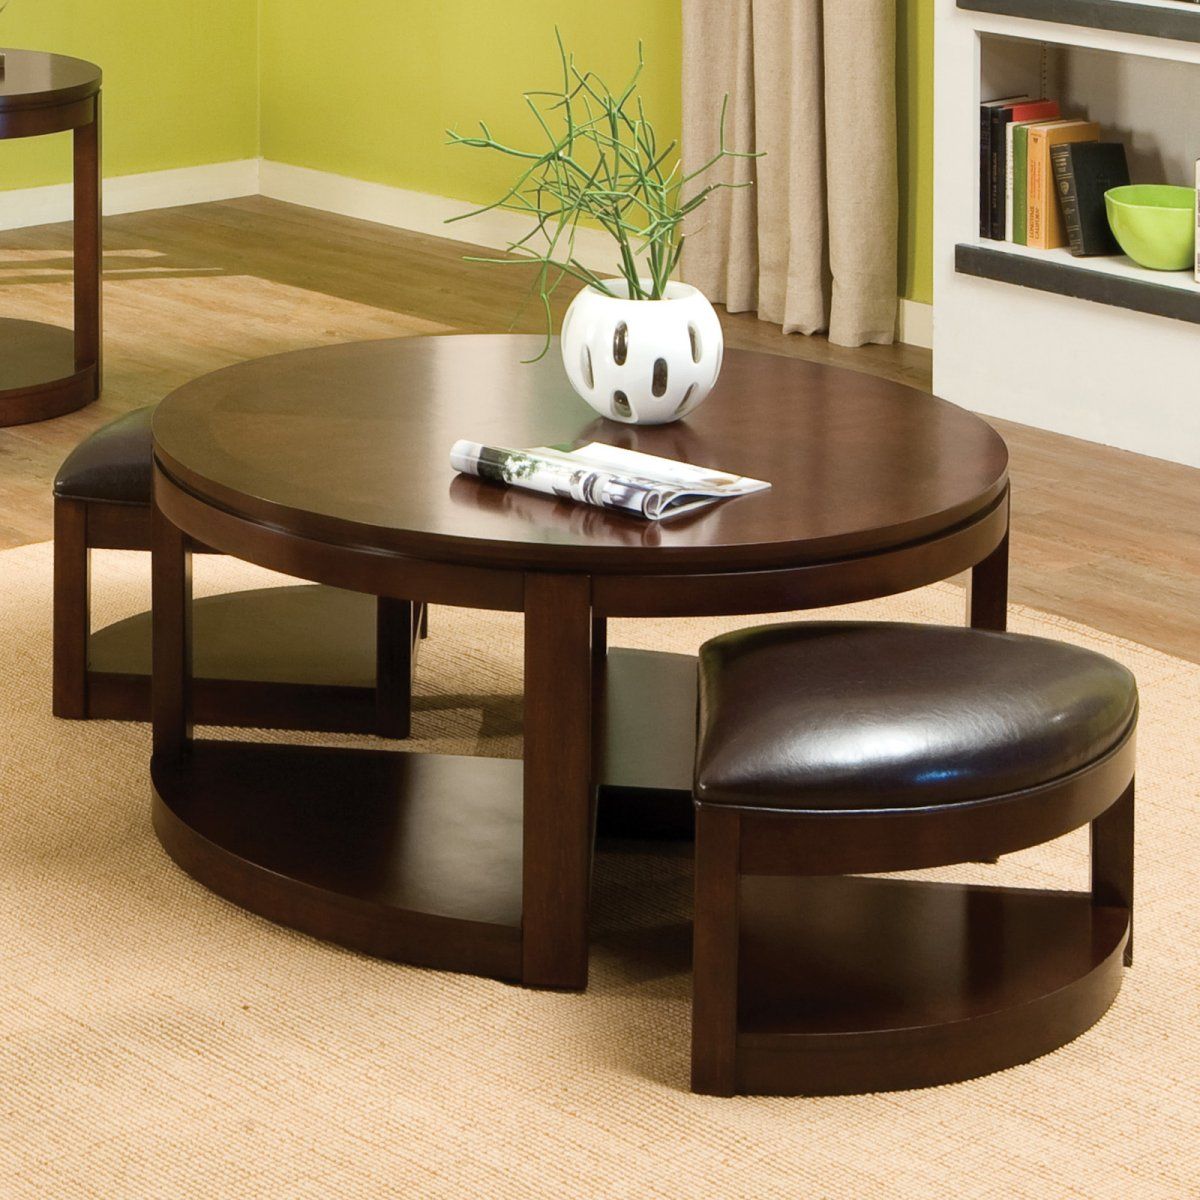 The Round Coffee Tables With Storage – The Simple And Compact Furniture Inside Round Coffee Tables (Gallery 17 of 20)